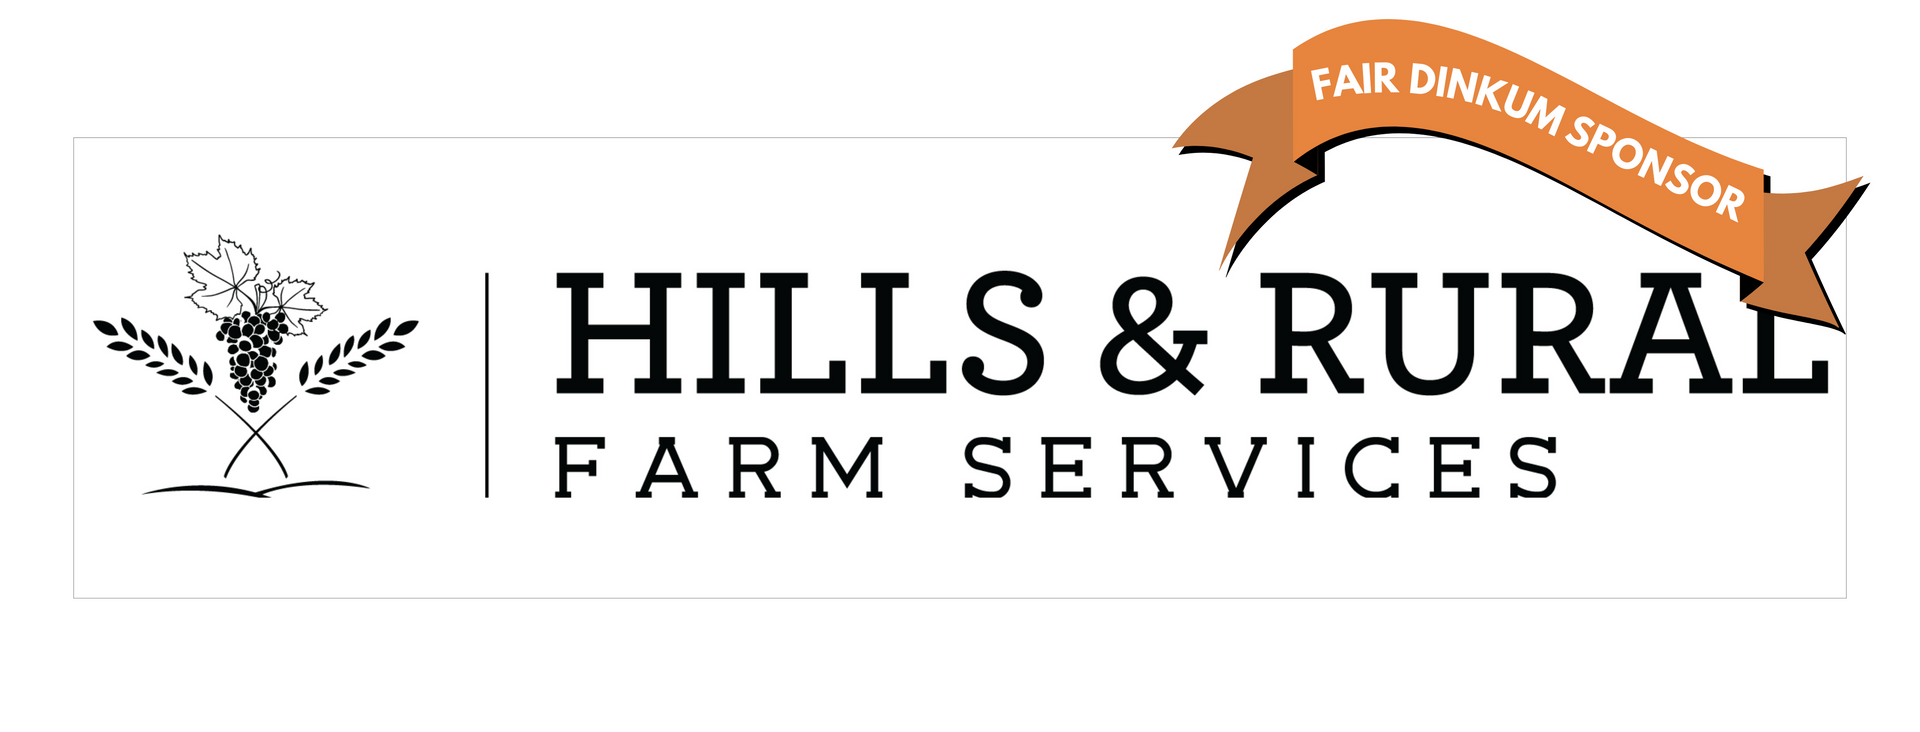 Hills and Rural Farm Services